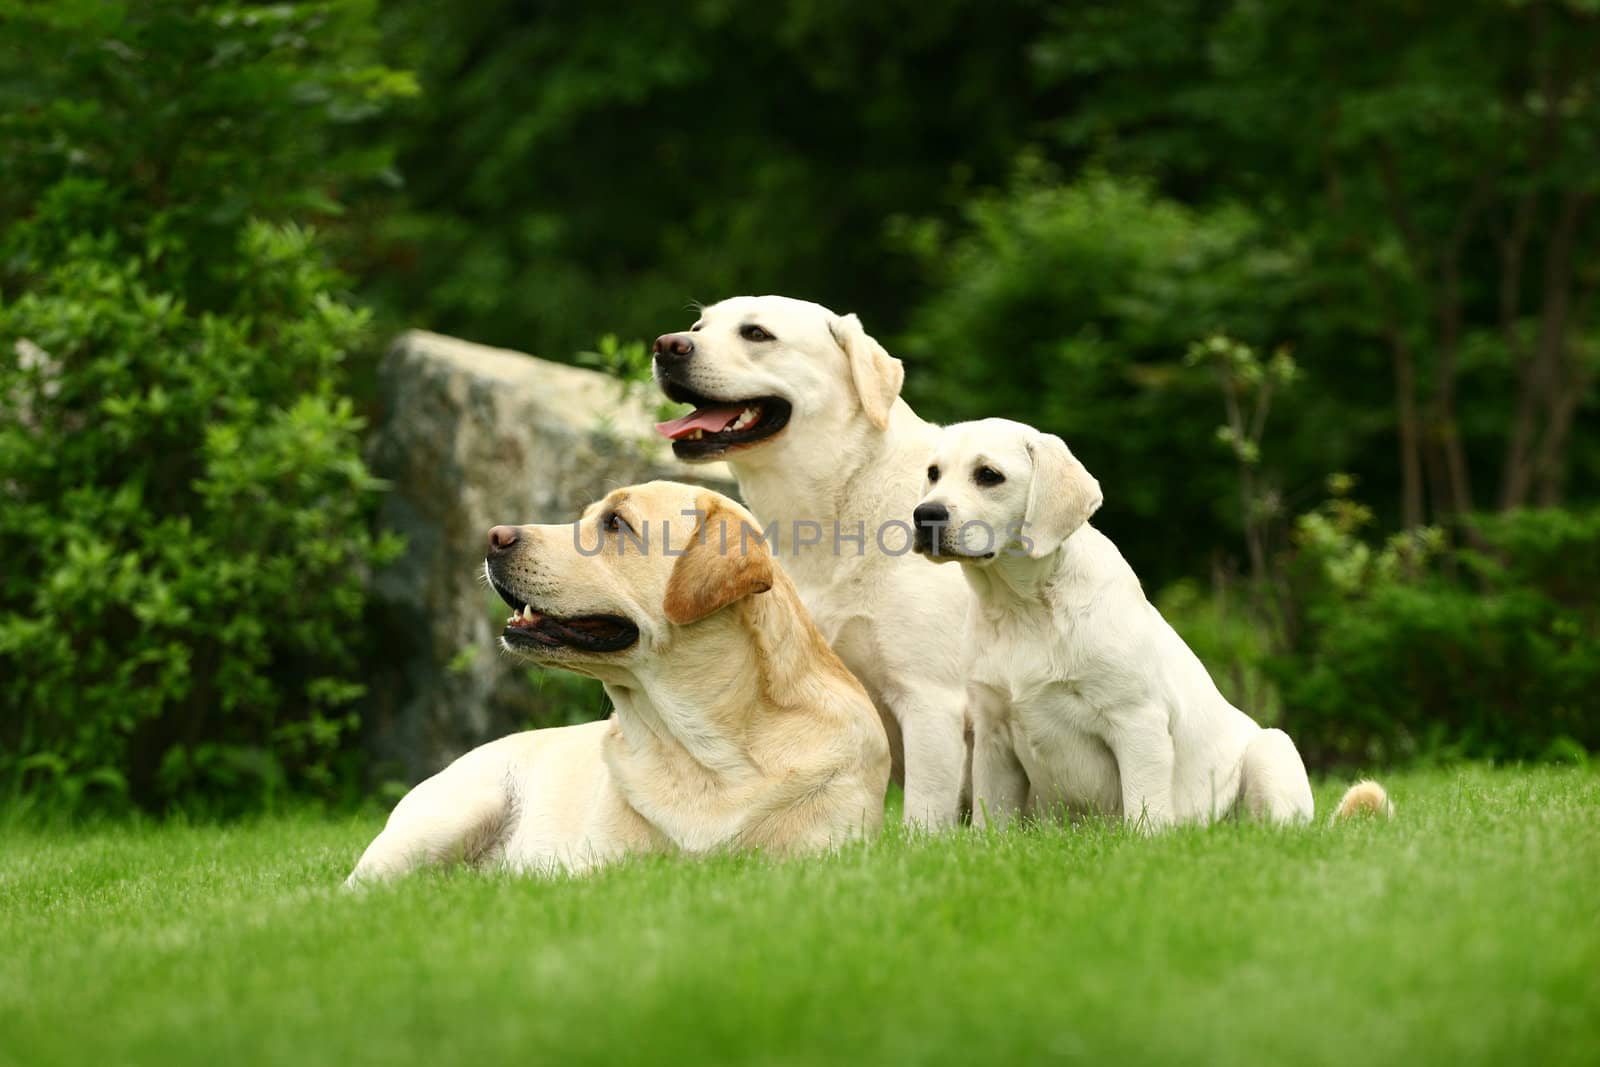 Three white dogs of a miscellaneous age pose on a lawn in park